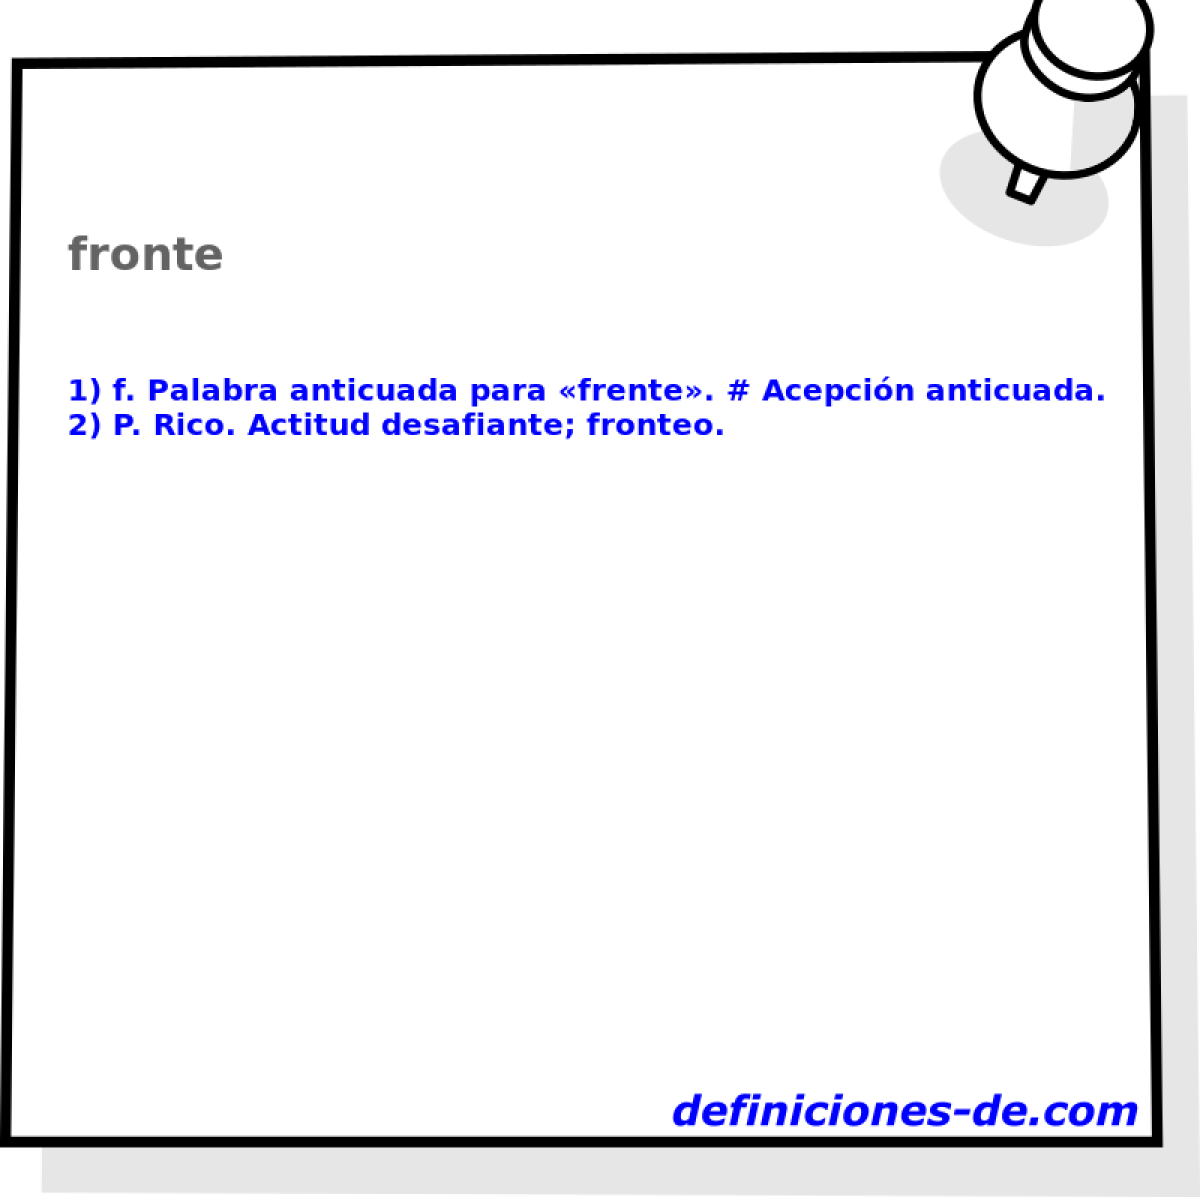 fronte 